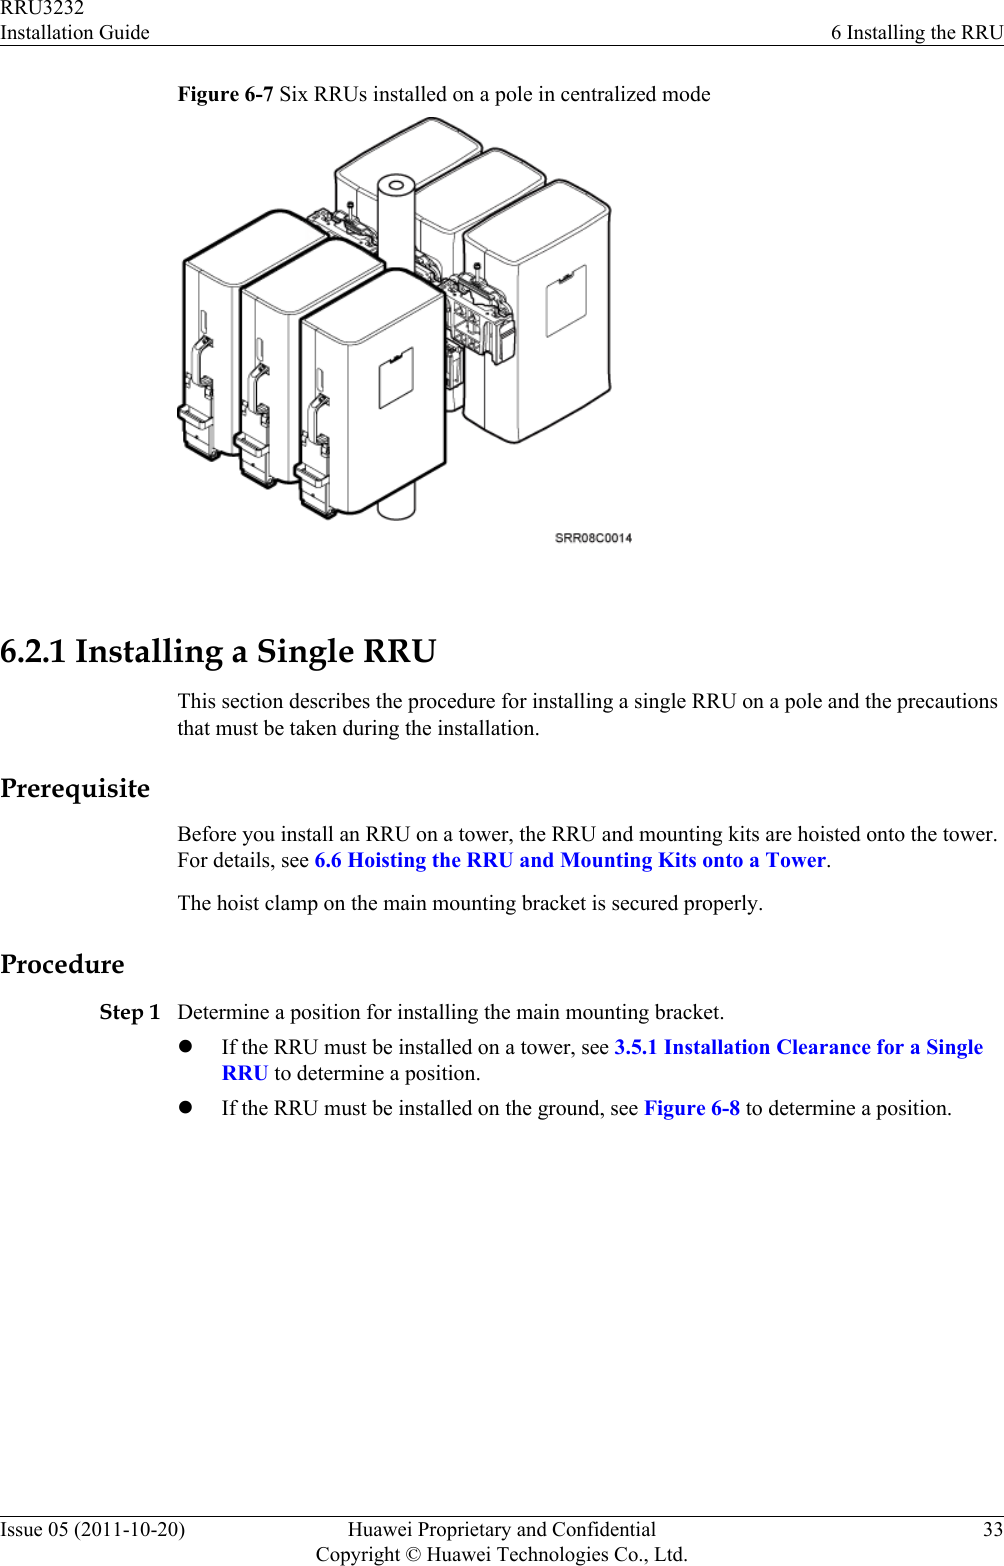 Figure 6-7 Six RRUs installed on a pole in centralized mode 6.2.1 Installing a Single RRUThis section describes the procedure for installing a single RRU on a pole and the precautionsthat must be taken during the installation.PrerequisiteBefore you install an RRU on a tower, the RRU and mounting kits are hoisted onto the tower.For details, see 6.6 Hoisting the RRU and Mounting Kits onto a Tower.The hoist clamp on the main mounting bracket is secured properly.ProcedureStep 1 Determine a position for installing the main mounting bracket.lIf the RRU must be installed on a tower, see 3.5.1 Installation Clearance for a SingleRRU to determine a position.lIf the RRU must be installed on the ground, see Figure 6-8 to determine a position.RRU3232Installation Guide 6 Installing the RRUIssue 05 (2011-10-20) Huawei Proprietary and ConfidentialCopyright © Huawei Technologies Co., Ltd.33